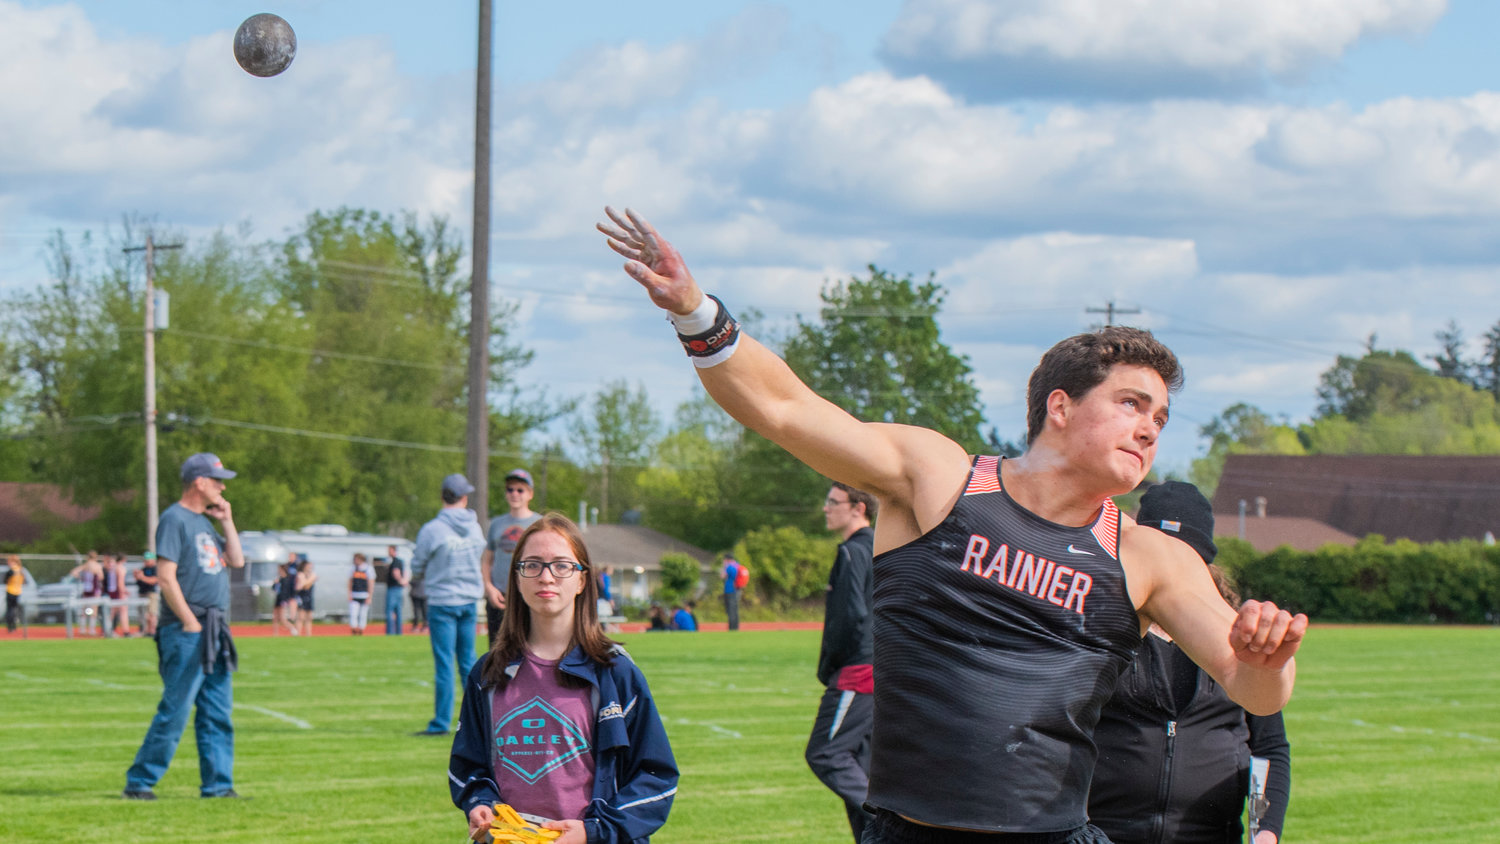 Rainier’s Jeremiah Nubbe throws shotput at W.F. West High School in Chehalis on Friday, May 20, 2022.